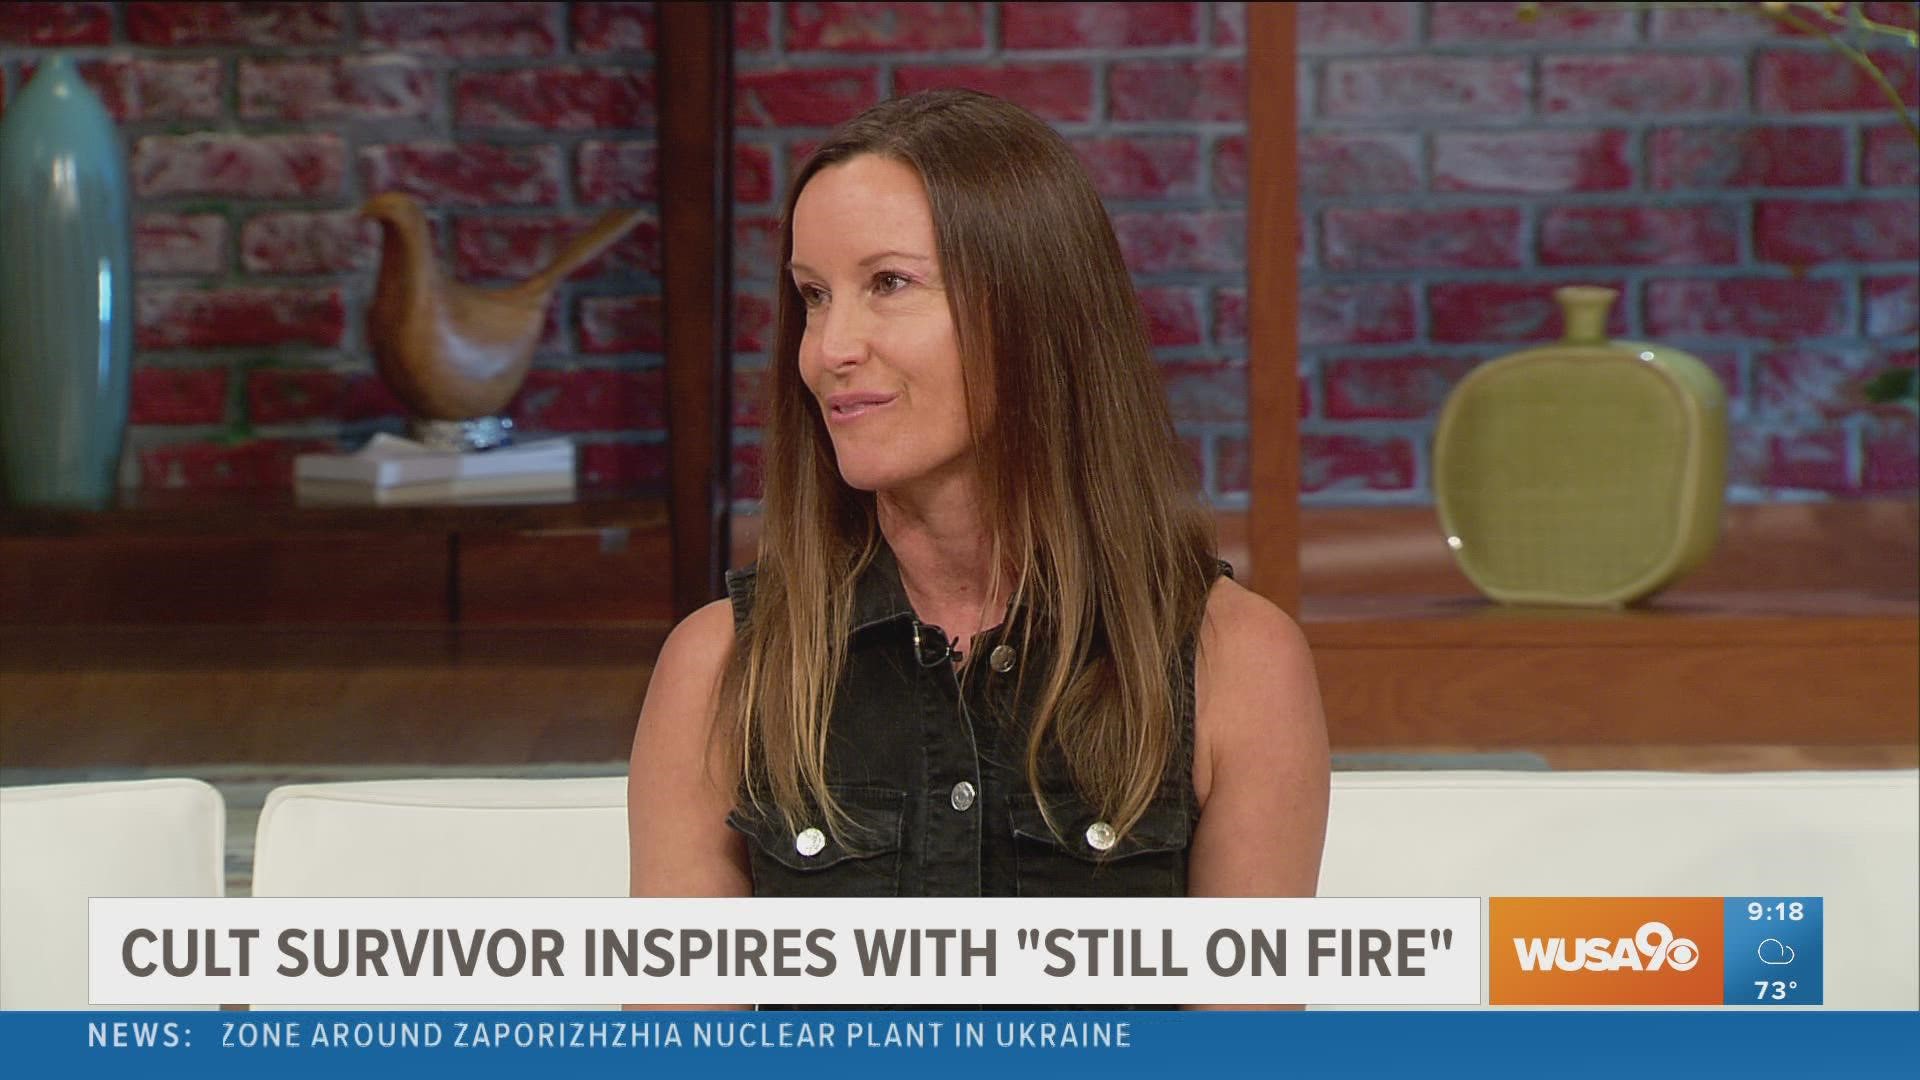 Author and entrepreneur Renee Linnell, shares how she overcame extreme trauma after growing up in a cult. Her complete story is in her book "Still on Fire".